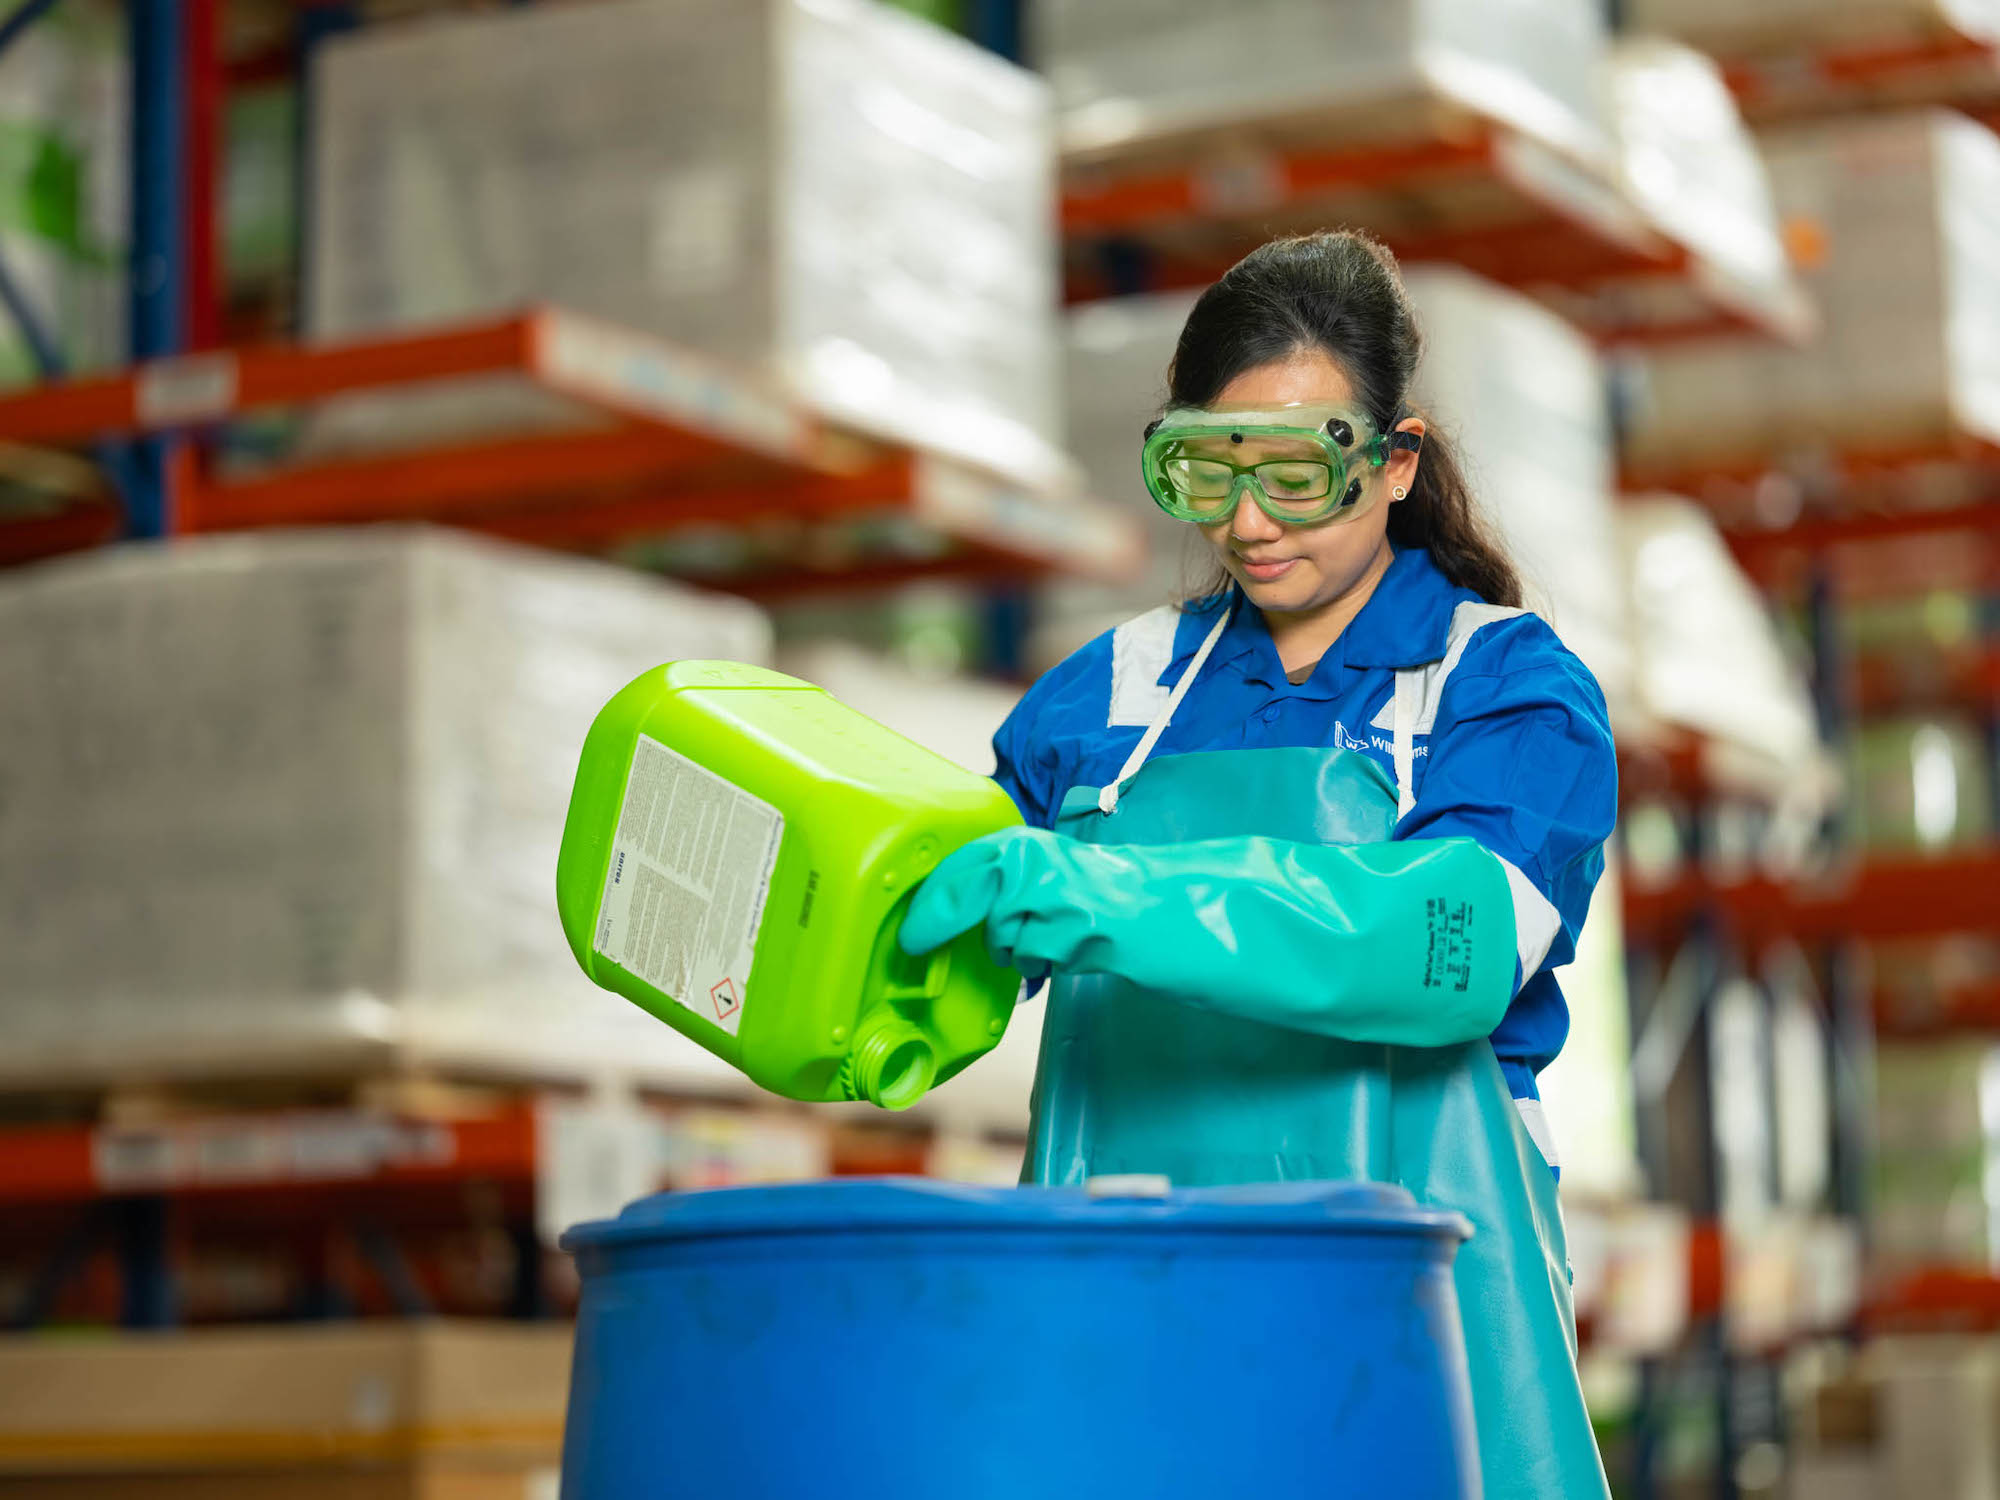 Wihelmson Industrial Photography - lady in protective gear pouring liquid into tanks